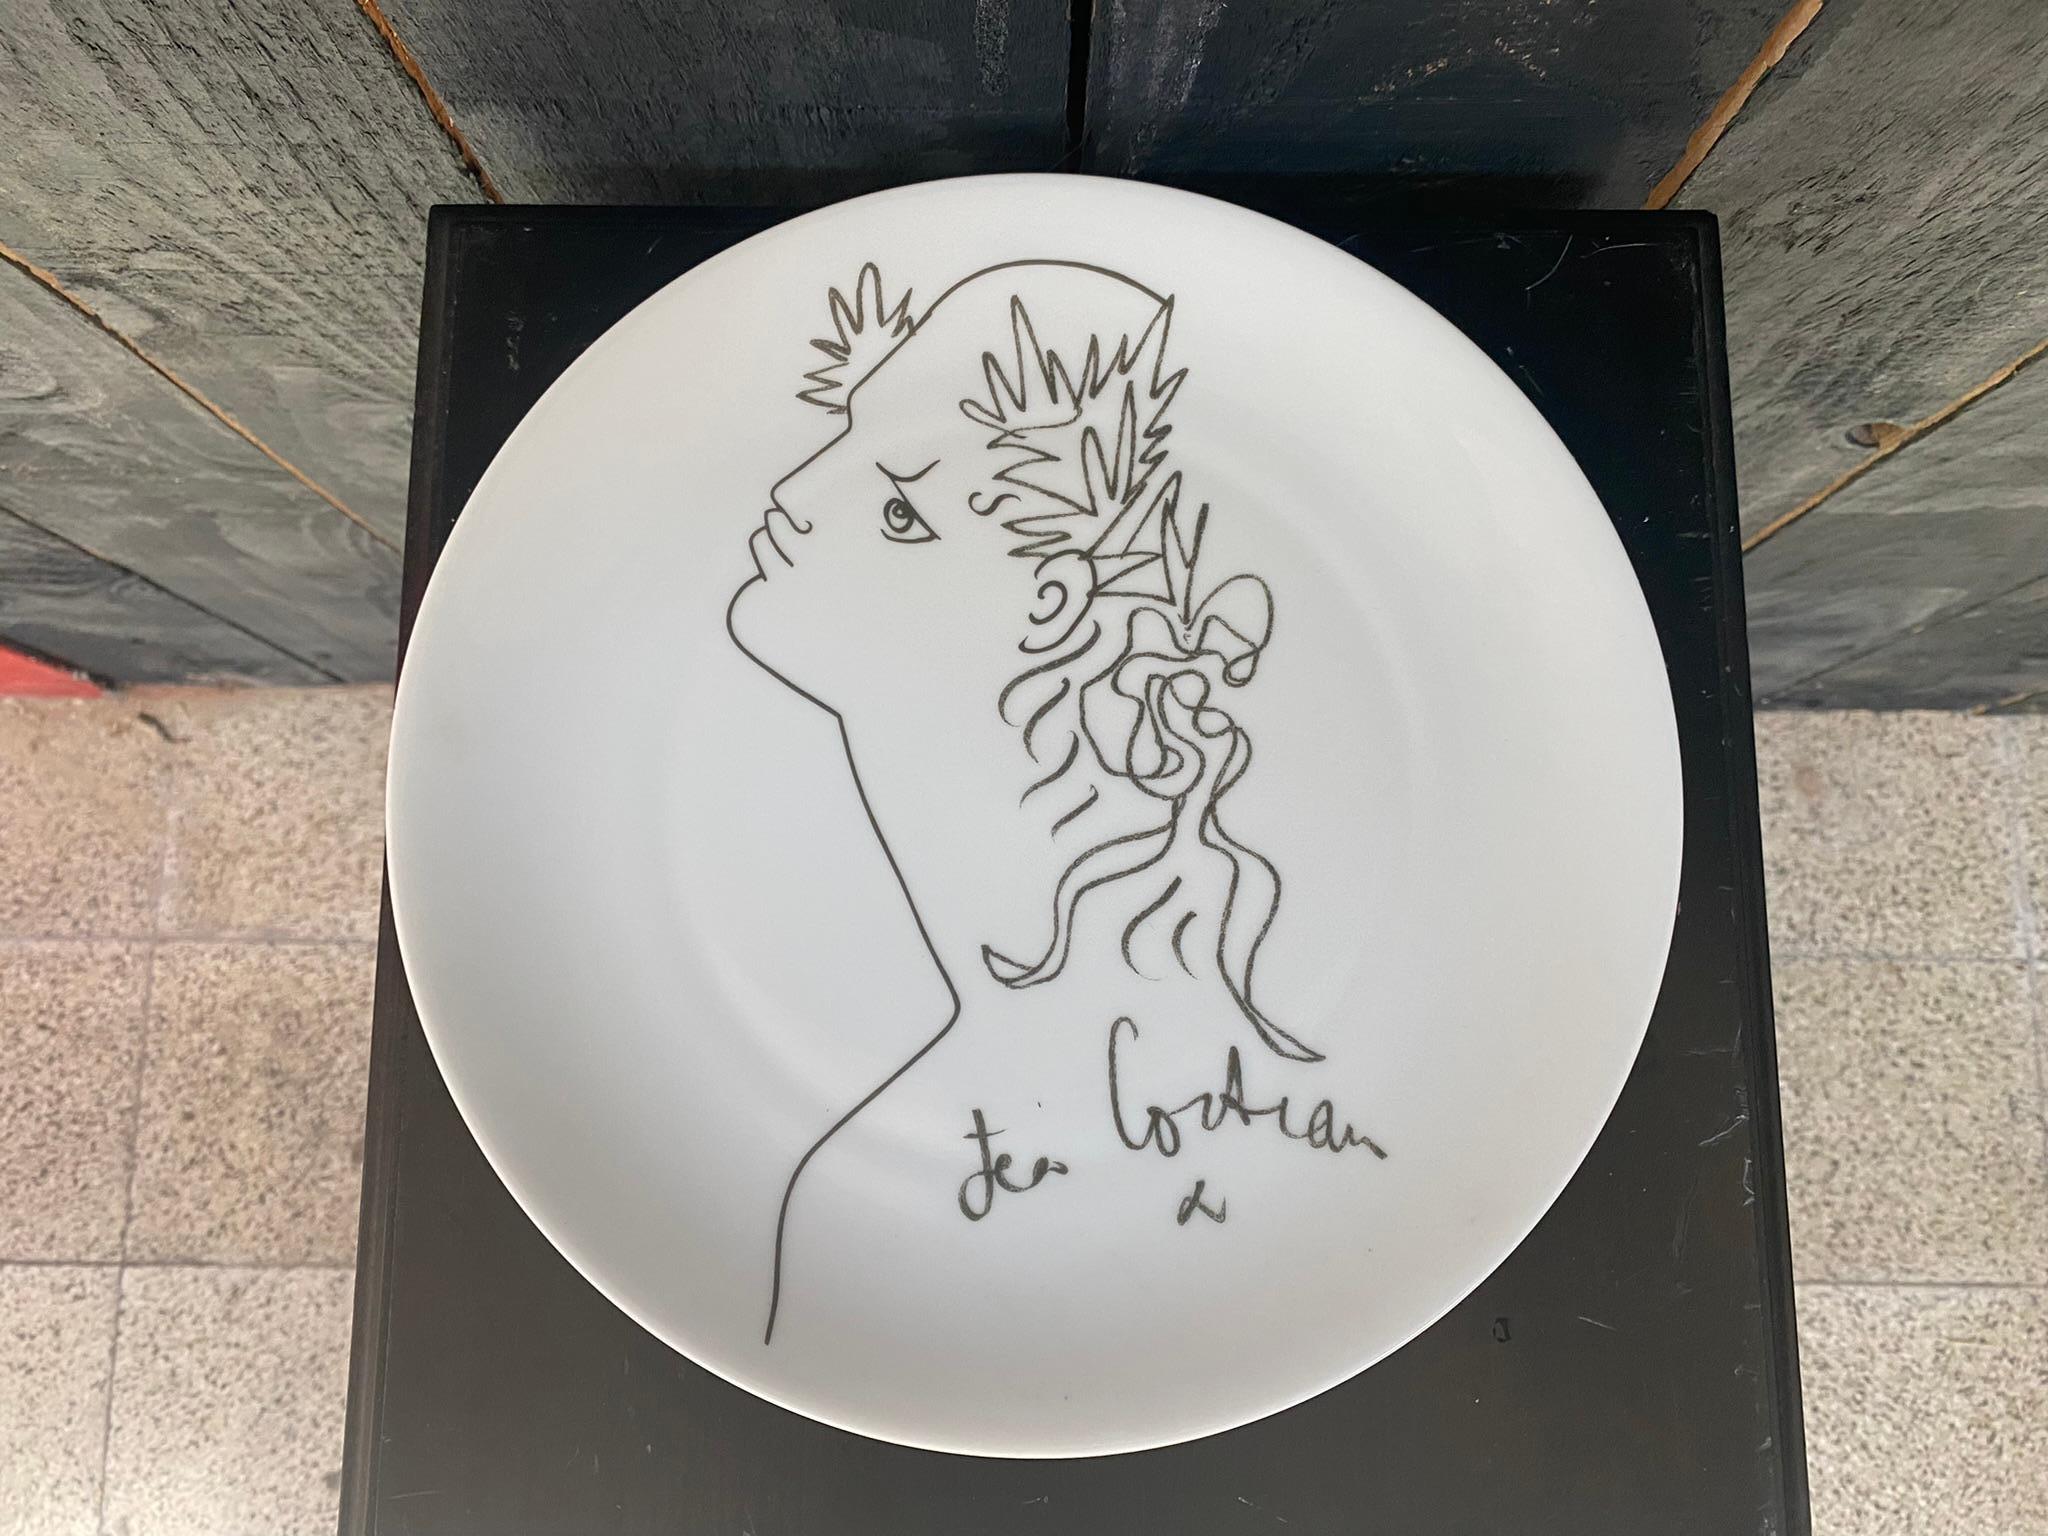 Cocteau Jean (1889-1963) Limoges Porcelain plate, signed and numbered 144/250.
the background color is slightly pinkish.